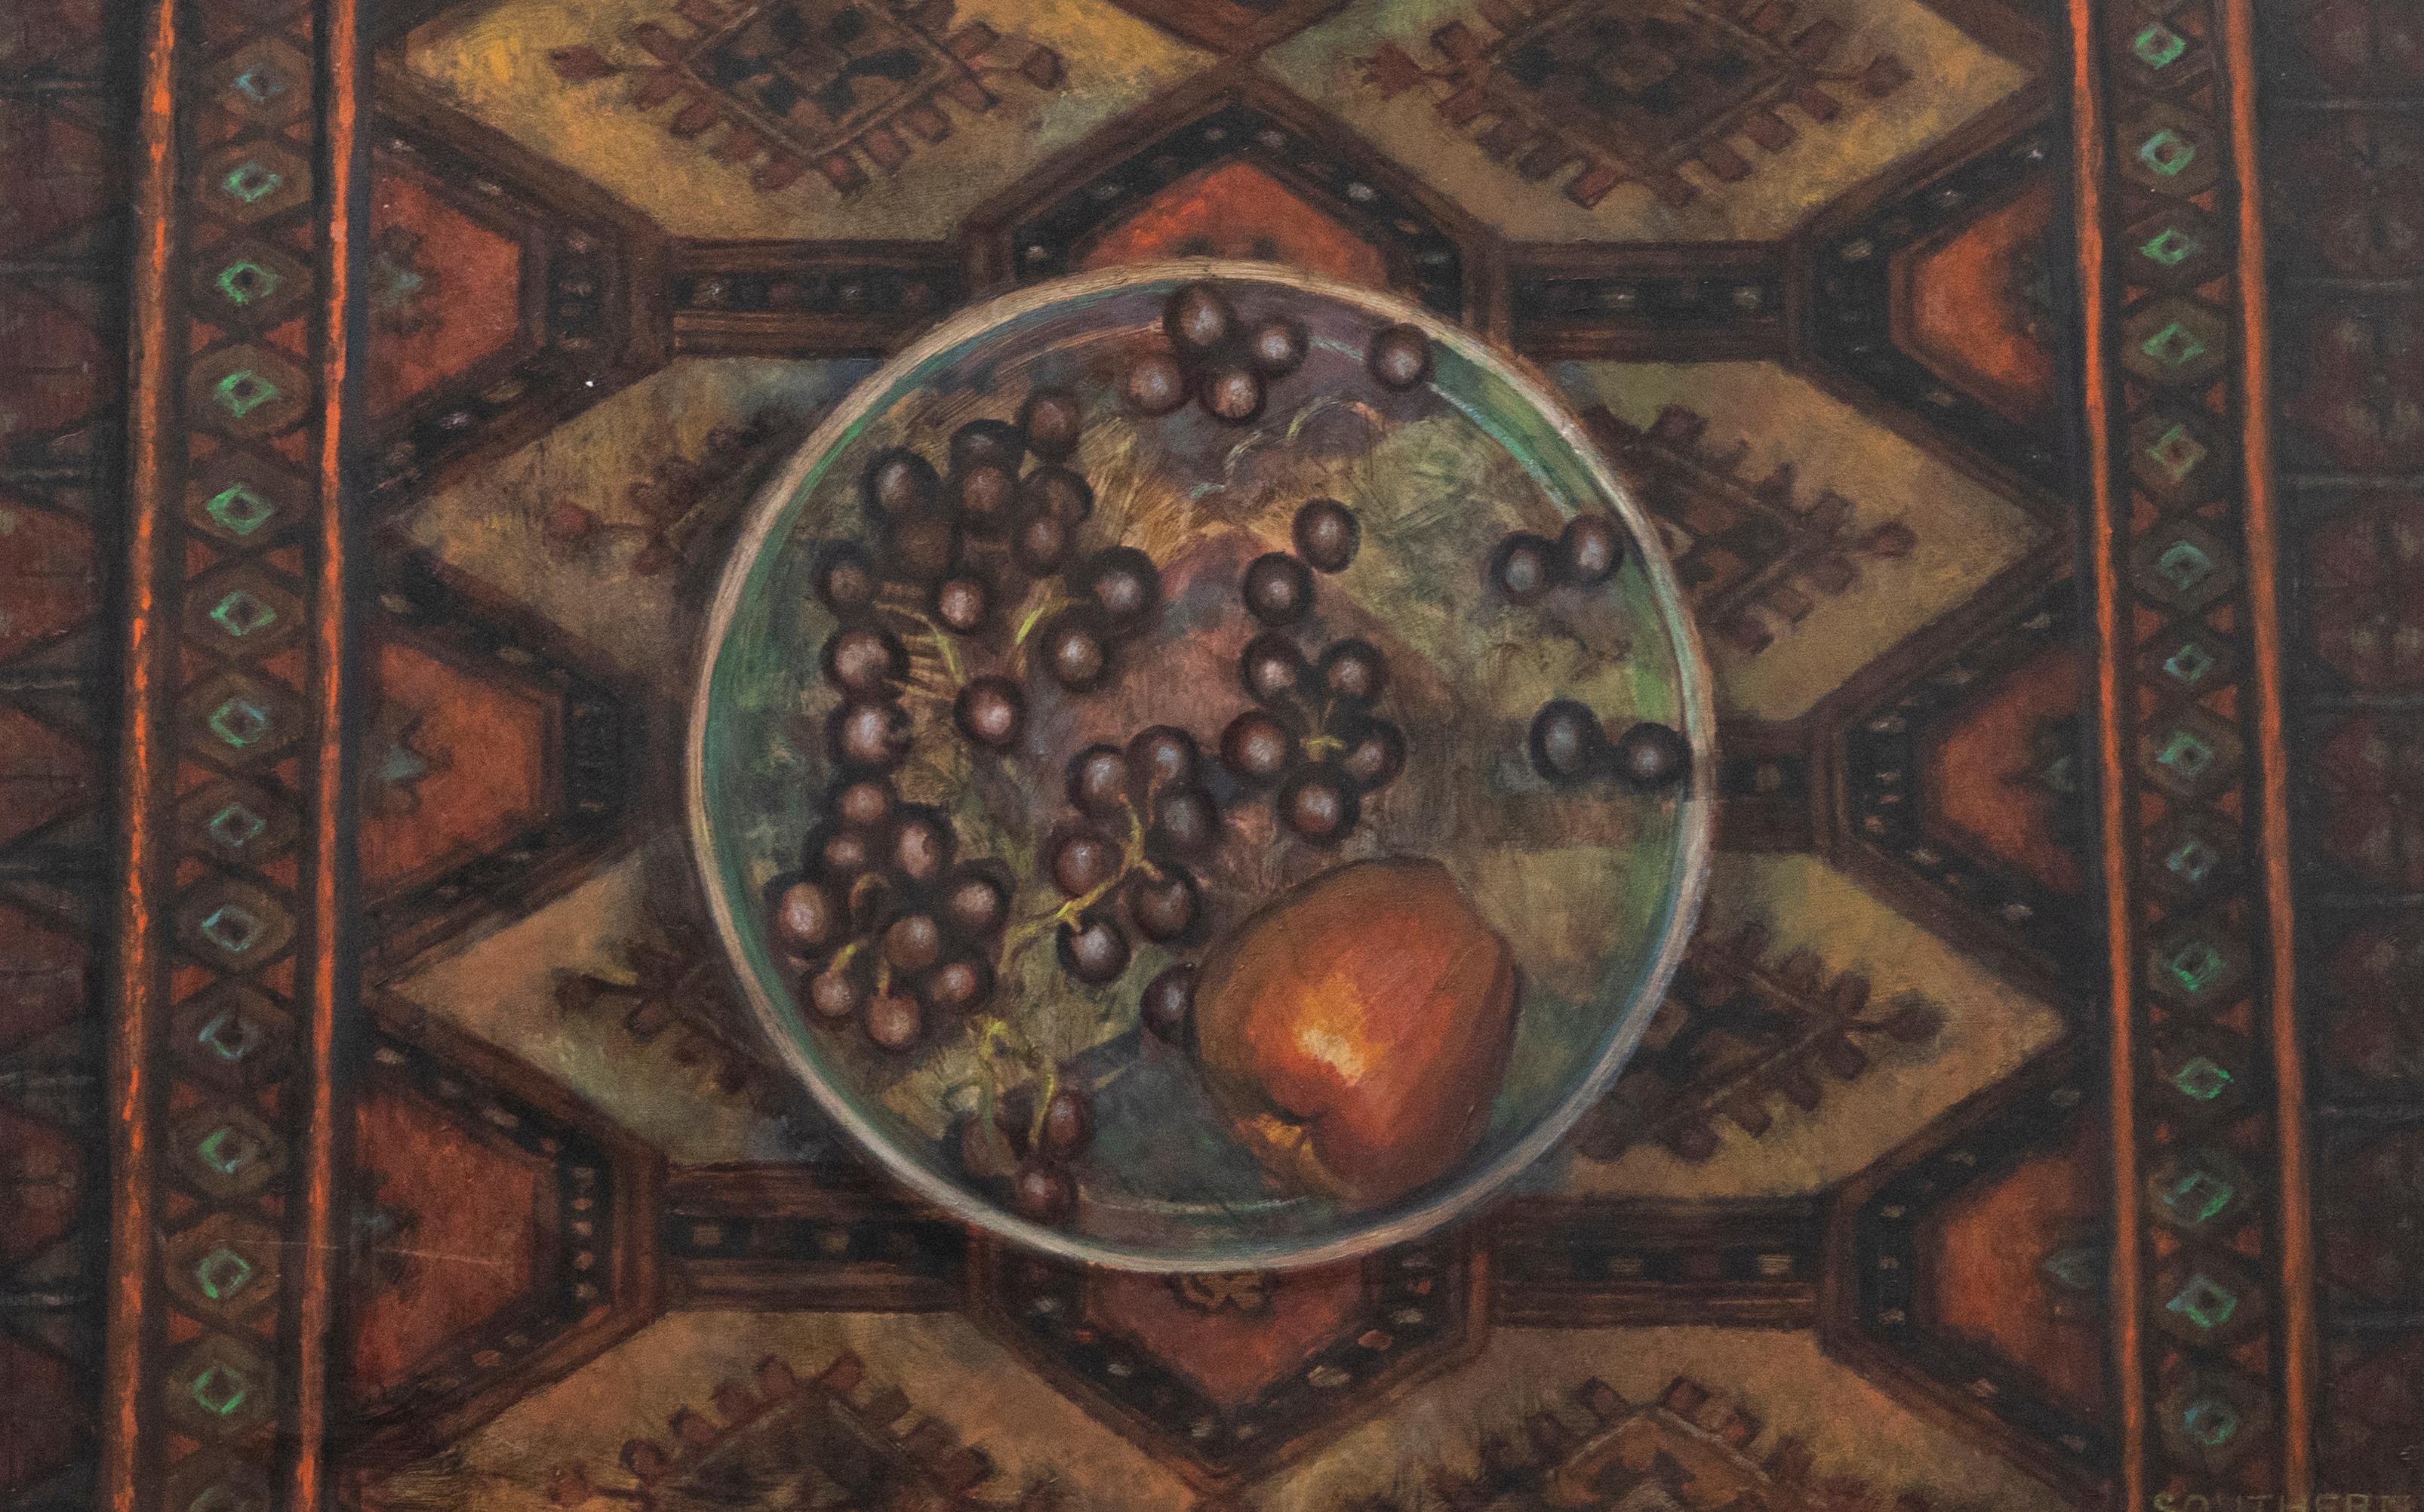 An fine study depicting an aerial view of a bowl of grapes and an apple placed on a patterned surface. The artist captures the textile surface in rich, jewelled colours that adds a sense of luxury to the still life scene. Signed to the lower right.